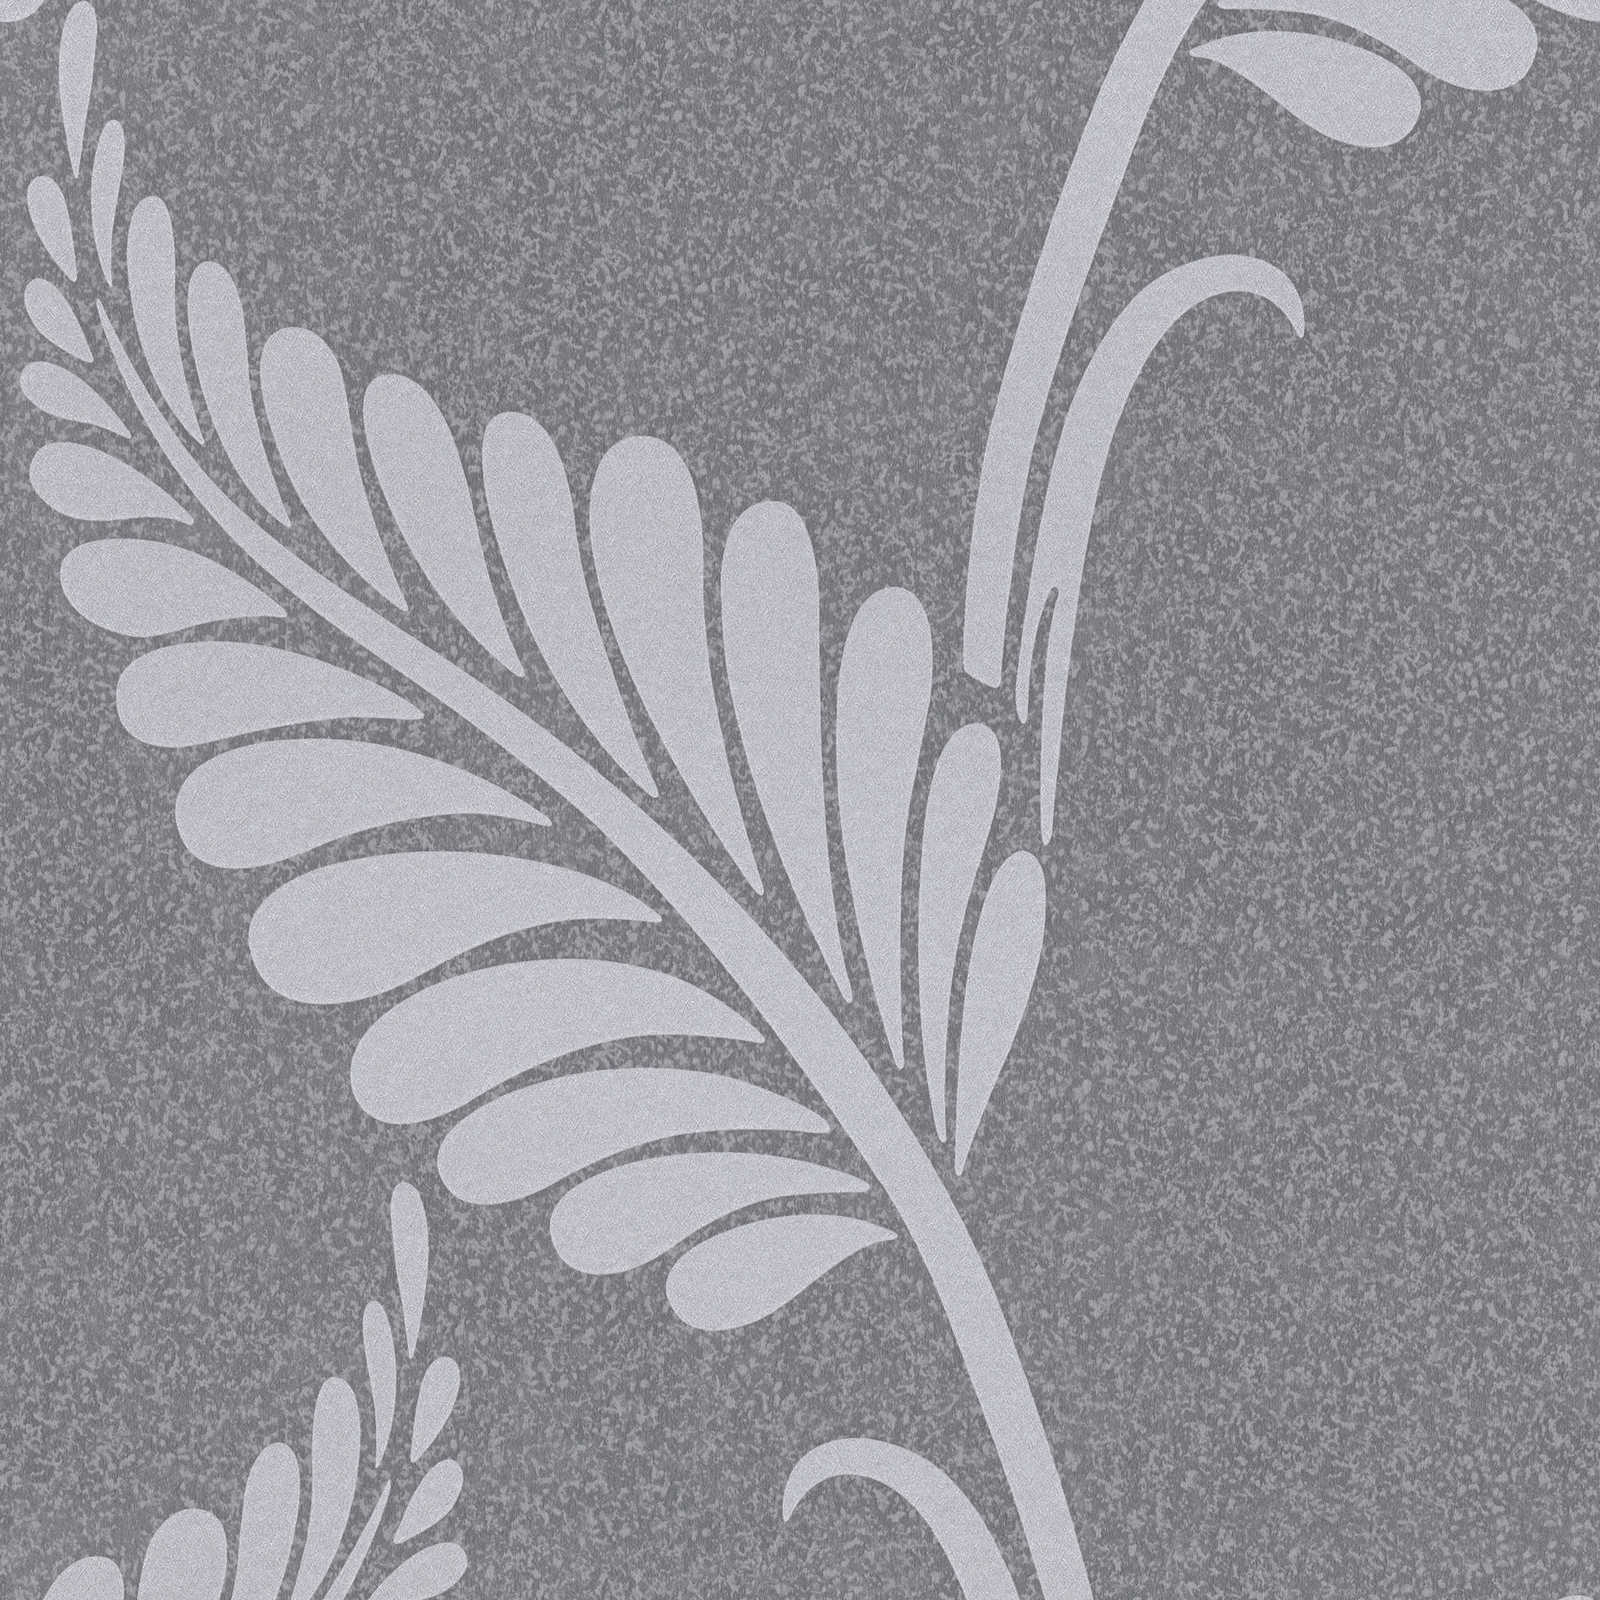 Glossy baroque paper wallpaper with ornaments - grey, silver
